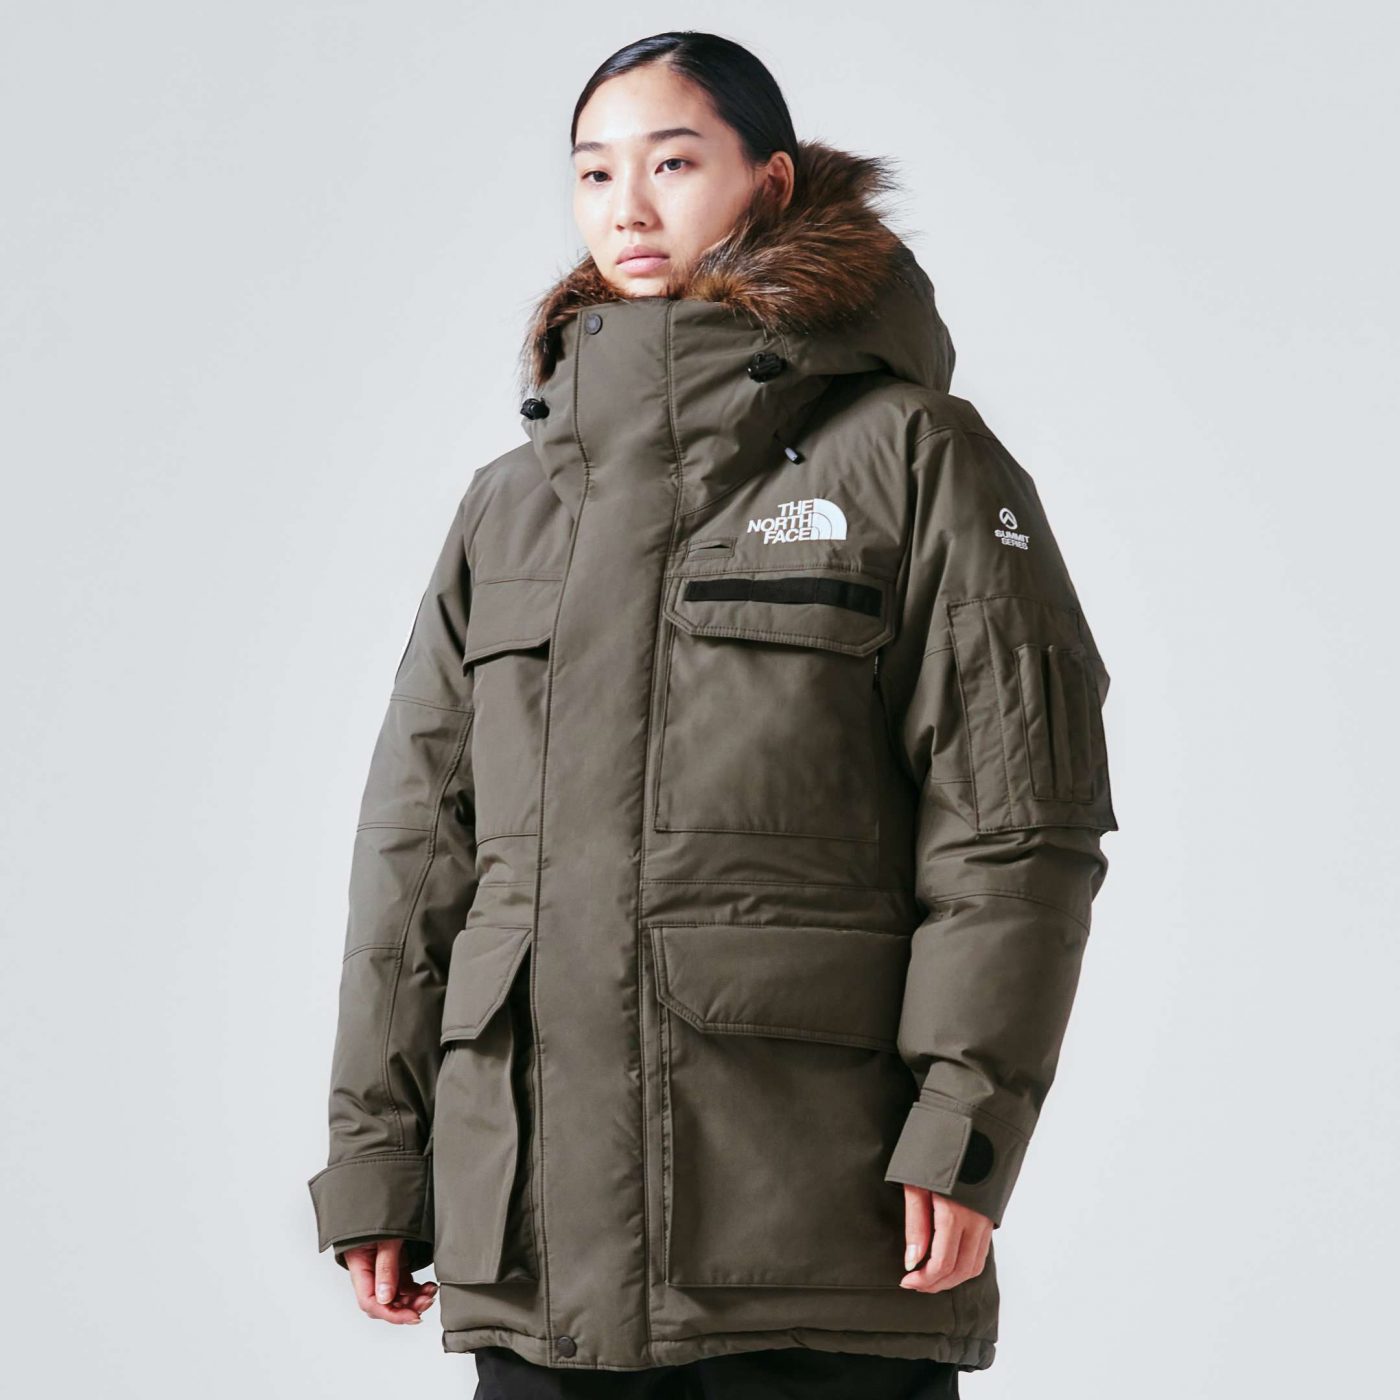 SOUTHERN CROSS PARKA (ND92120 / UNISEX) - THE NORTH FACE MOUNTAIN